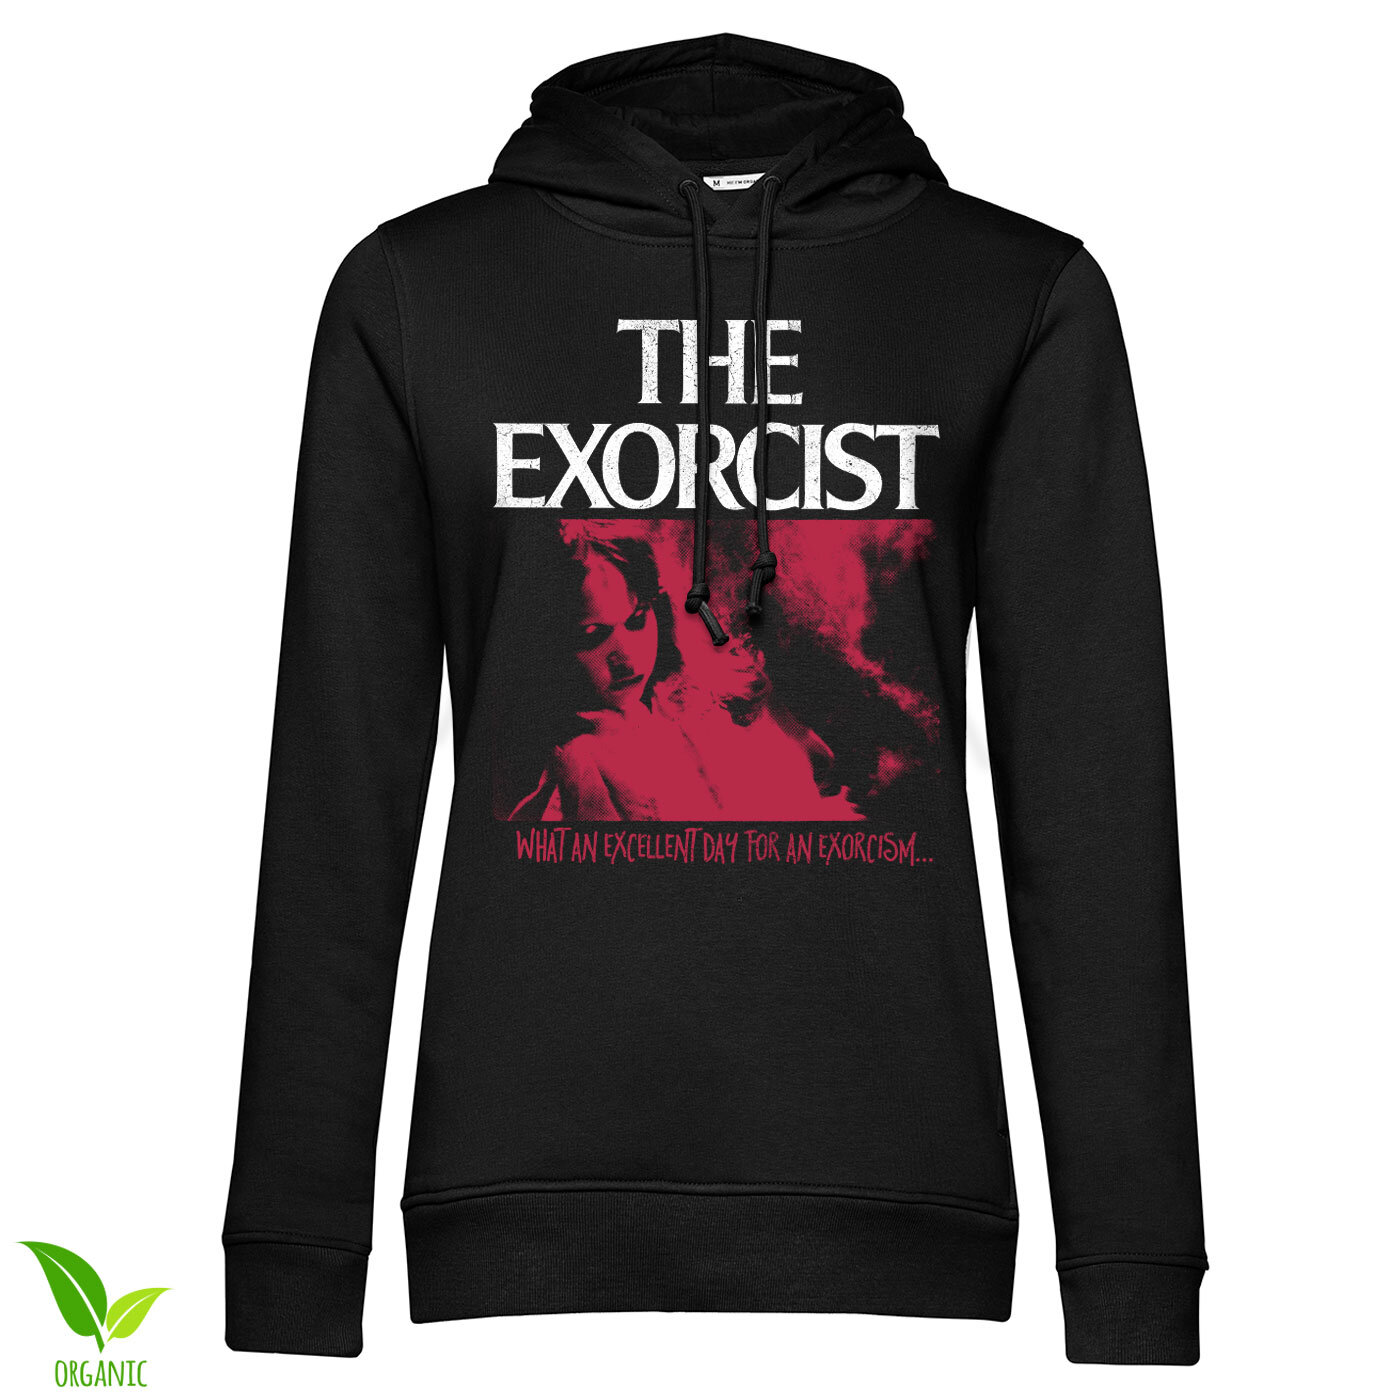 The Exorcist - Excellent Day Girls Hoodie